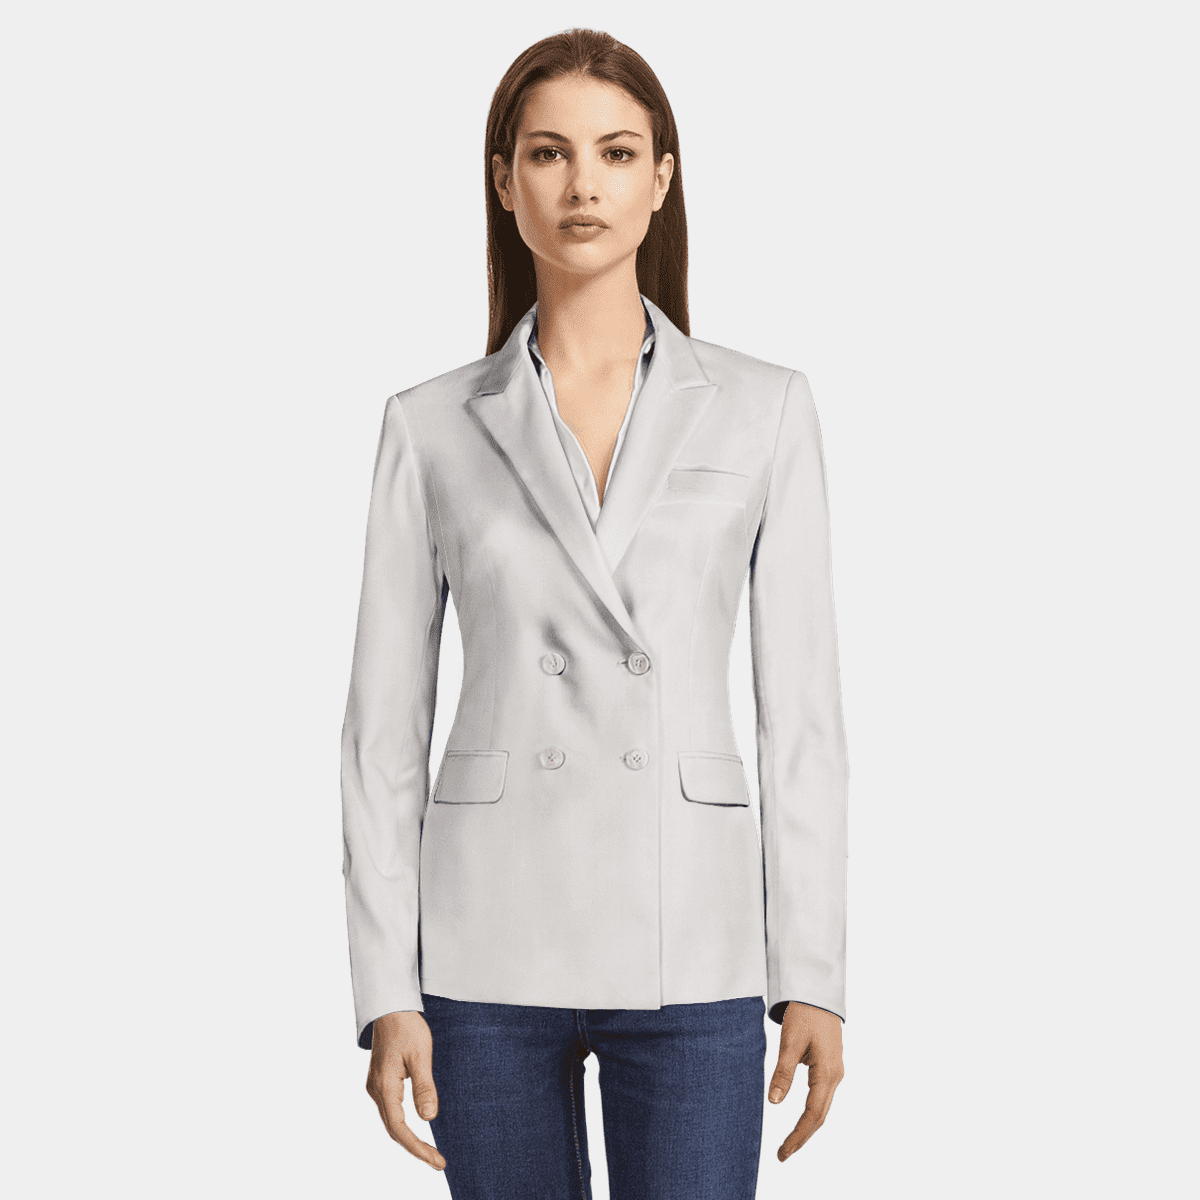 Women's Double Breasted Coats [Made to Measure] - Sumissura